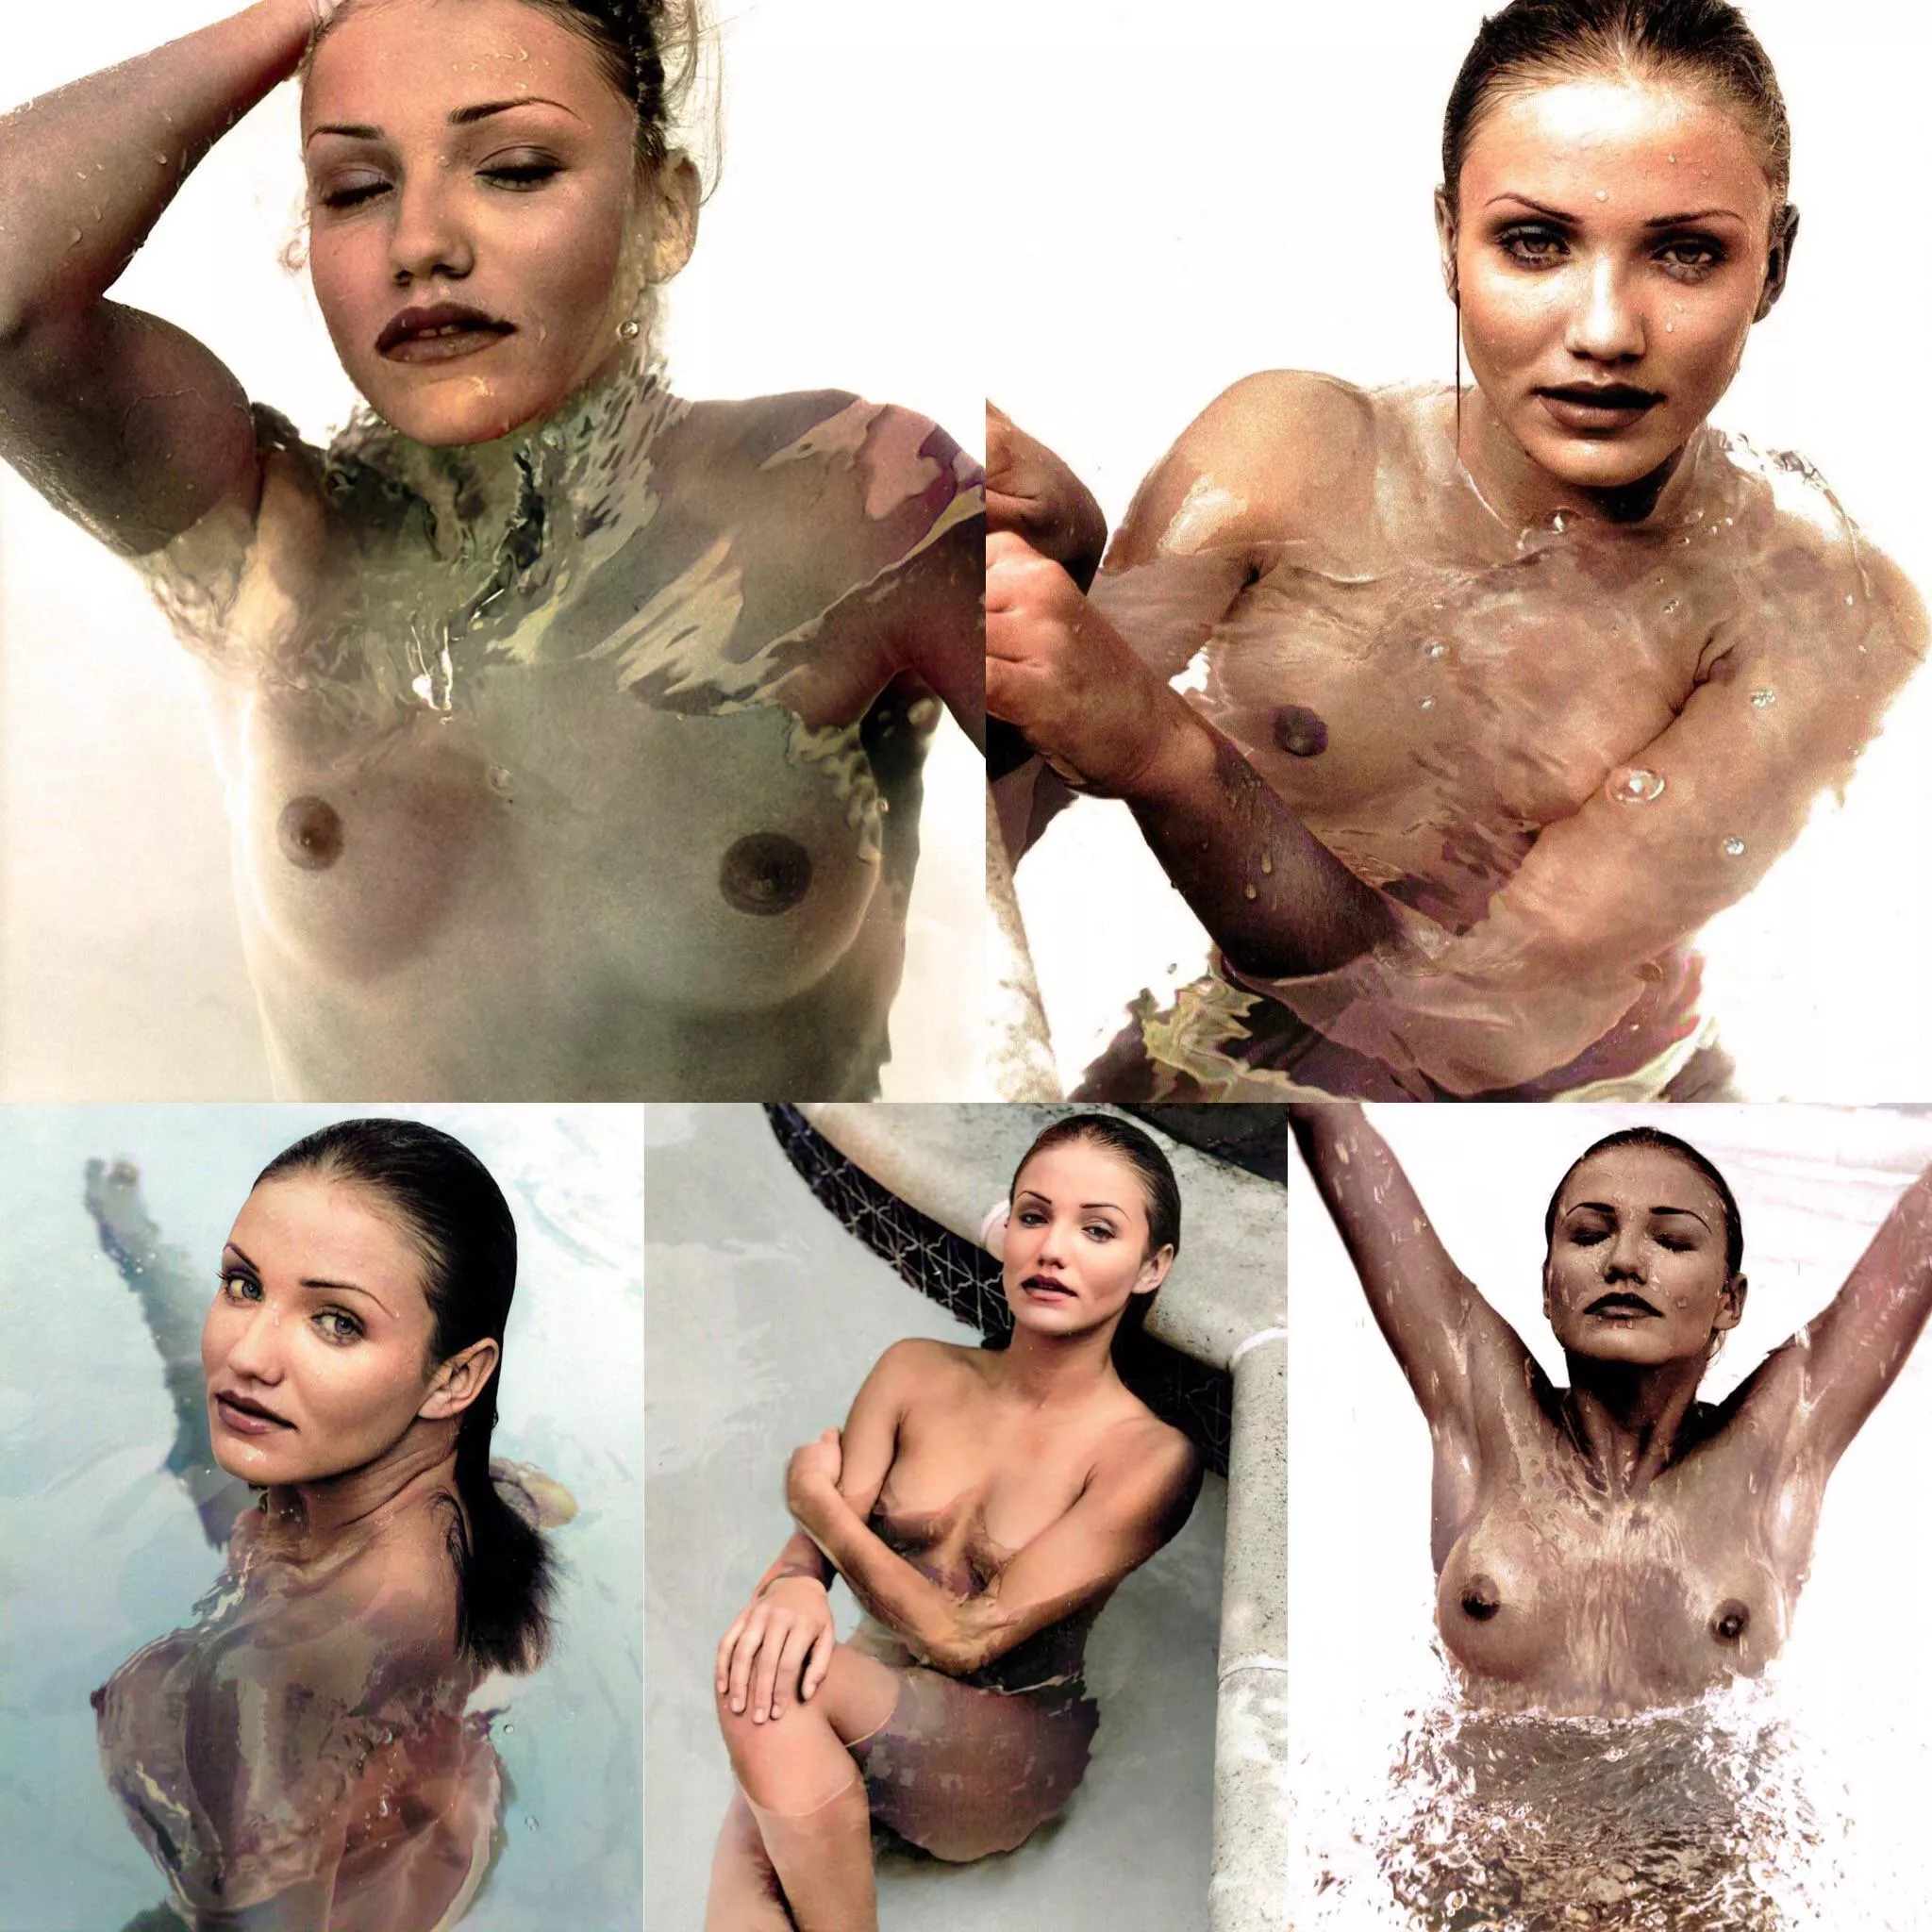 Watch cameron diaz nudes in CelebrityNipples www.asspictures.org.